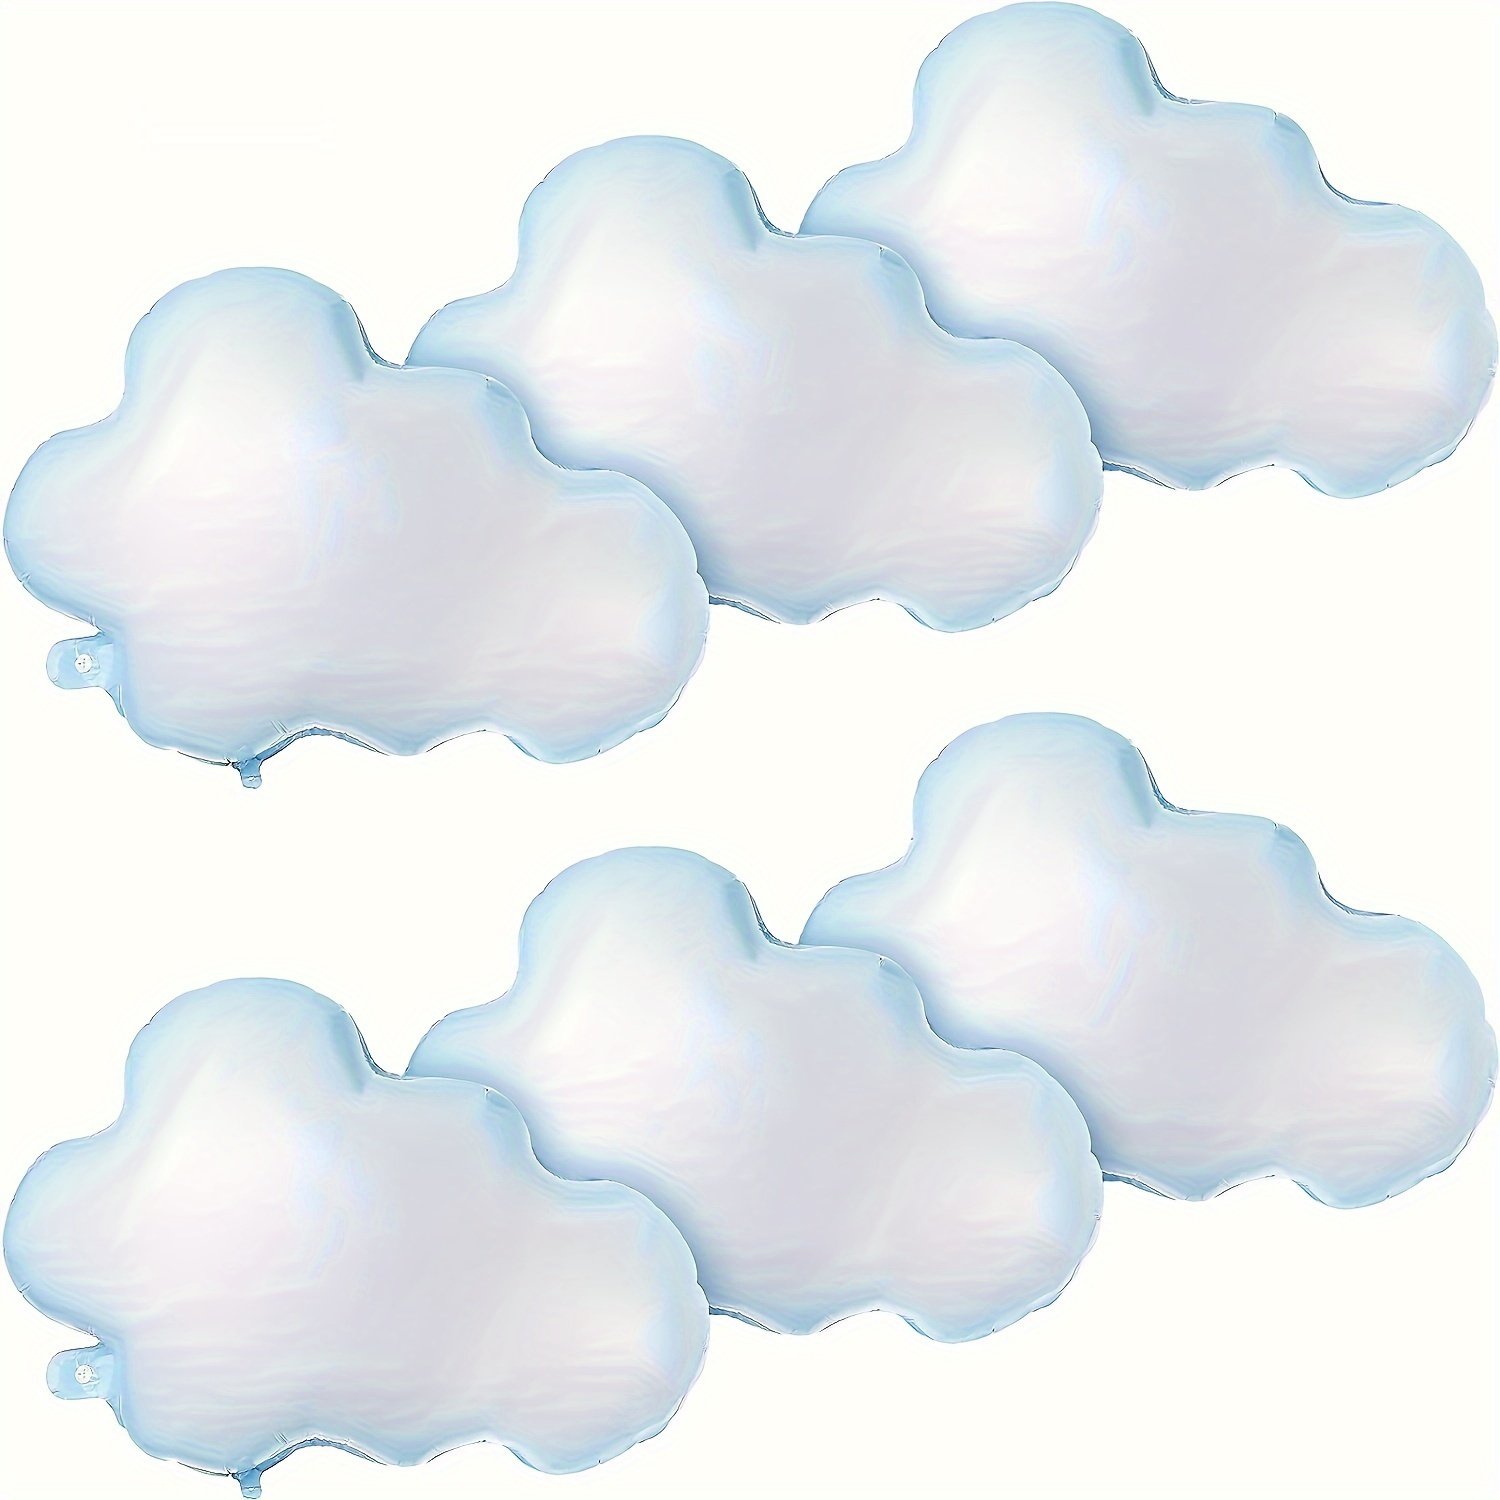 

6pcs, White Cloud Foil Balloons, Story Theme Party Decoration, Birthday Wedding Party Decoration, Holiday Decor, Home Decor, Indoor Outdoor Decor